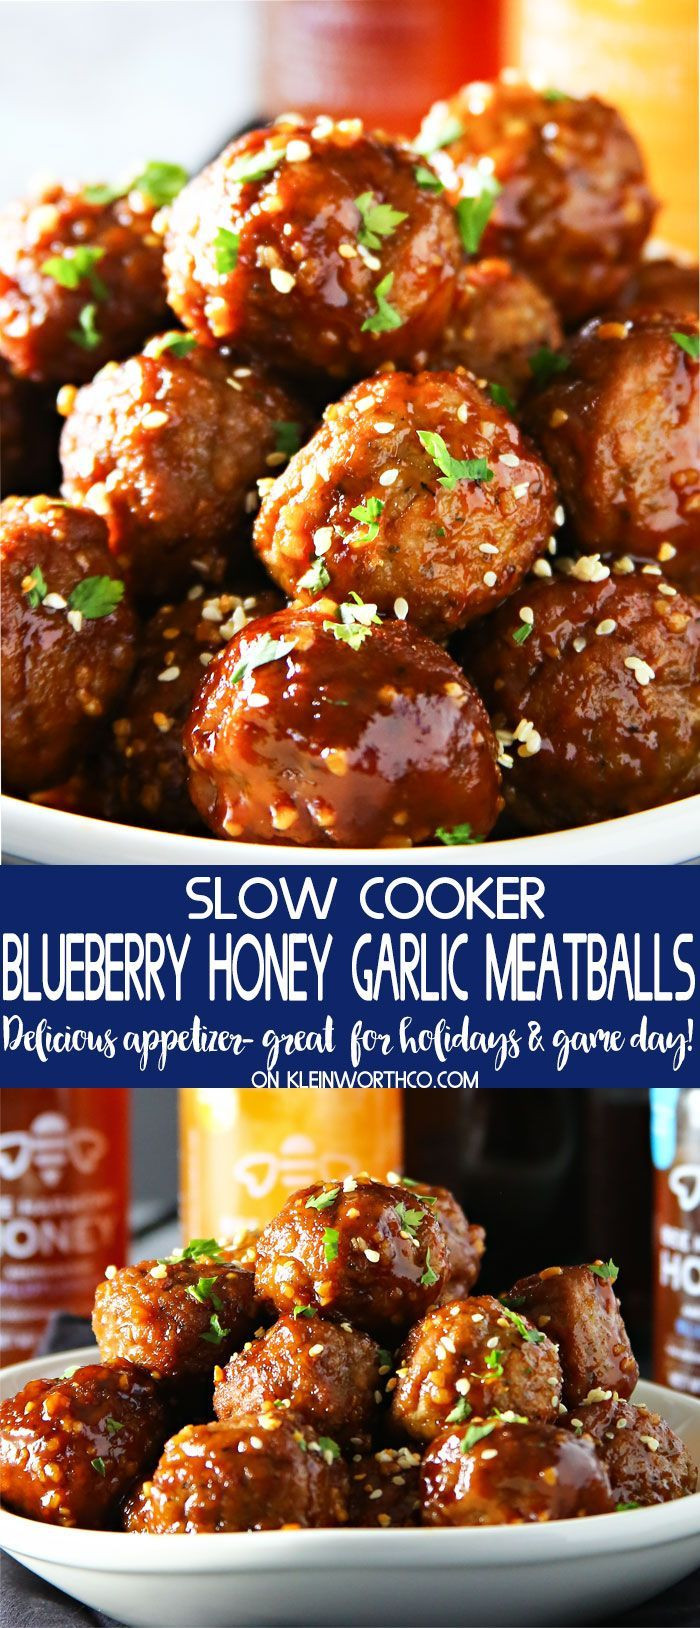 14 Easy Slow Cooker Appetizers
 Slow Cooker Blueberry Honey Garlic Meatballs are an easy